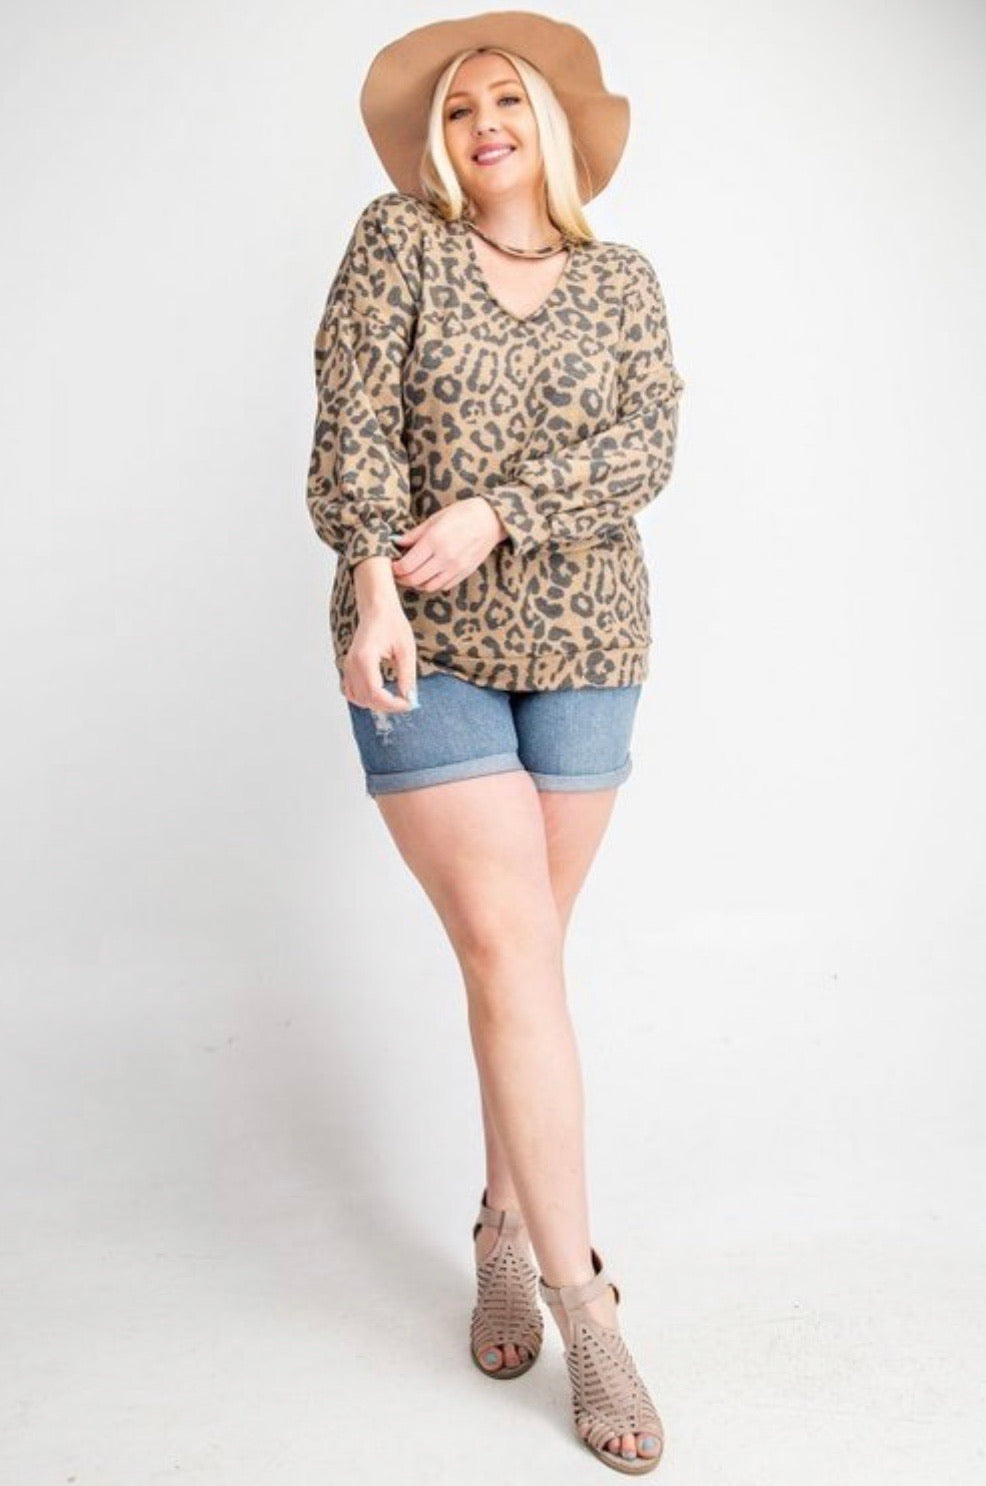 Lily Vintage Leopard Print Top (Plus) - Corinne Boutique Family Owned and Operated USA